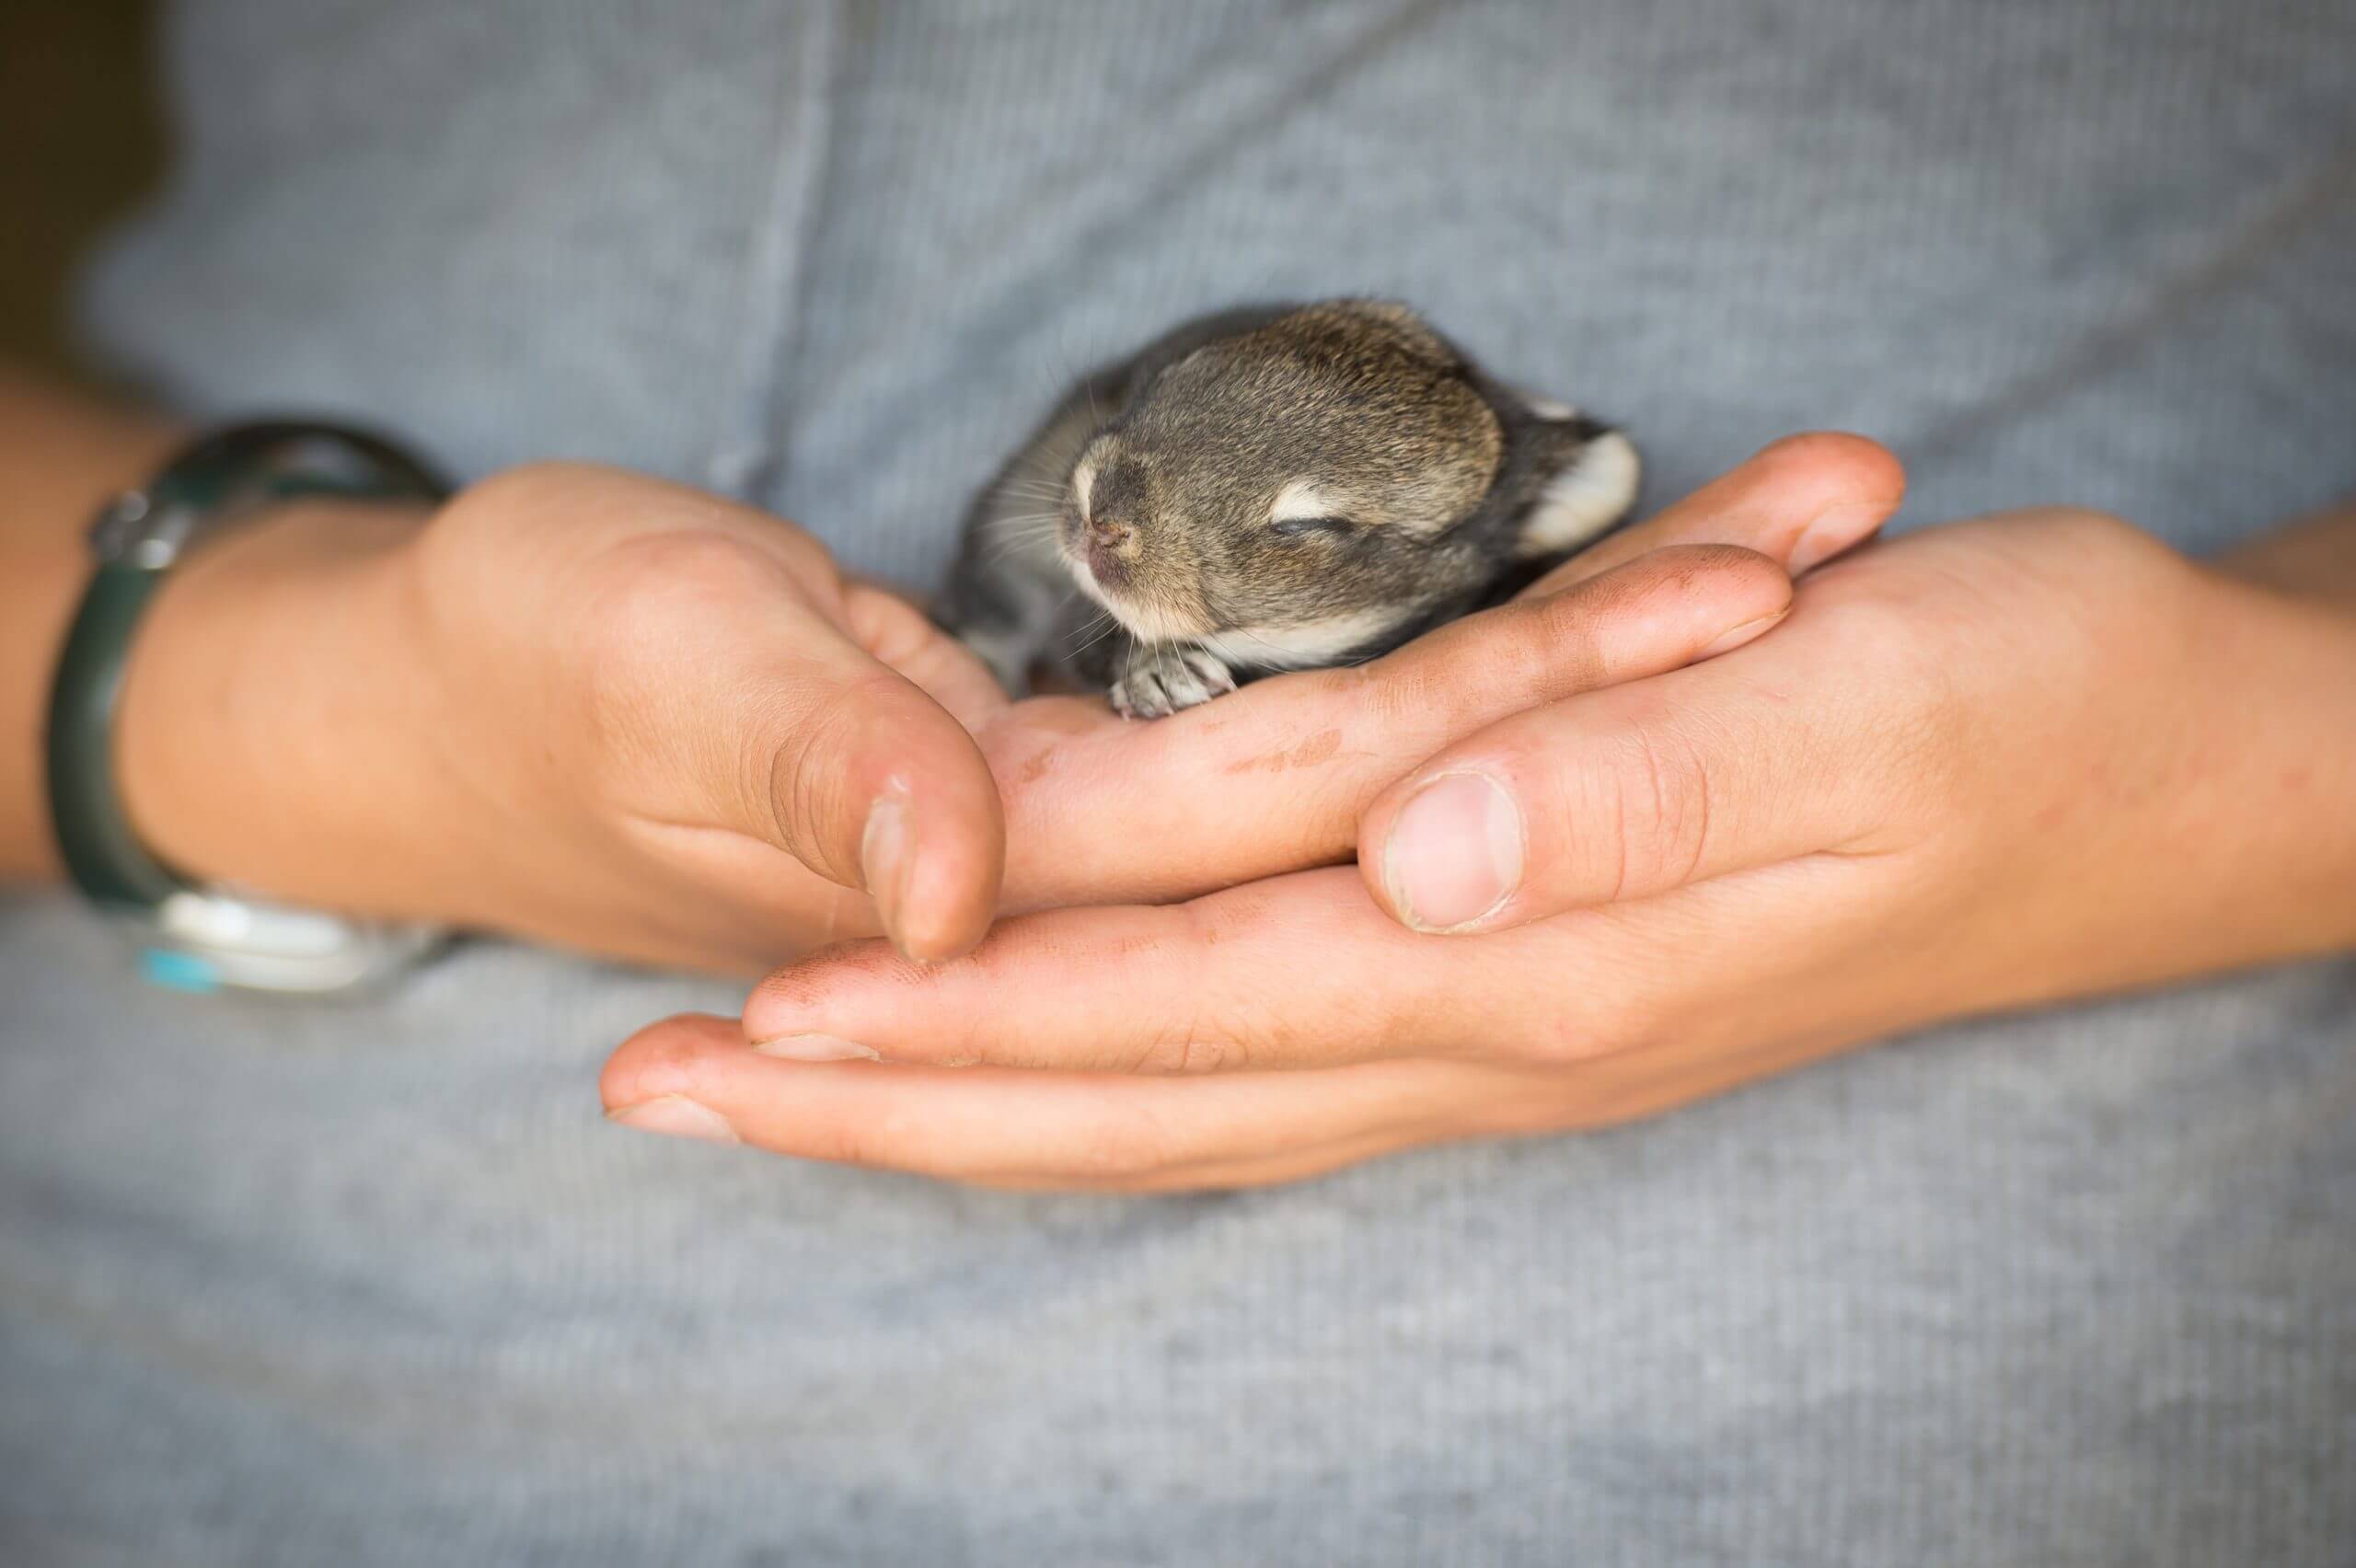 A baby rabbit rests in an open hand.